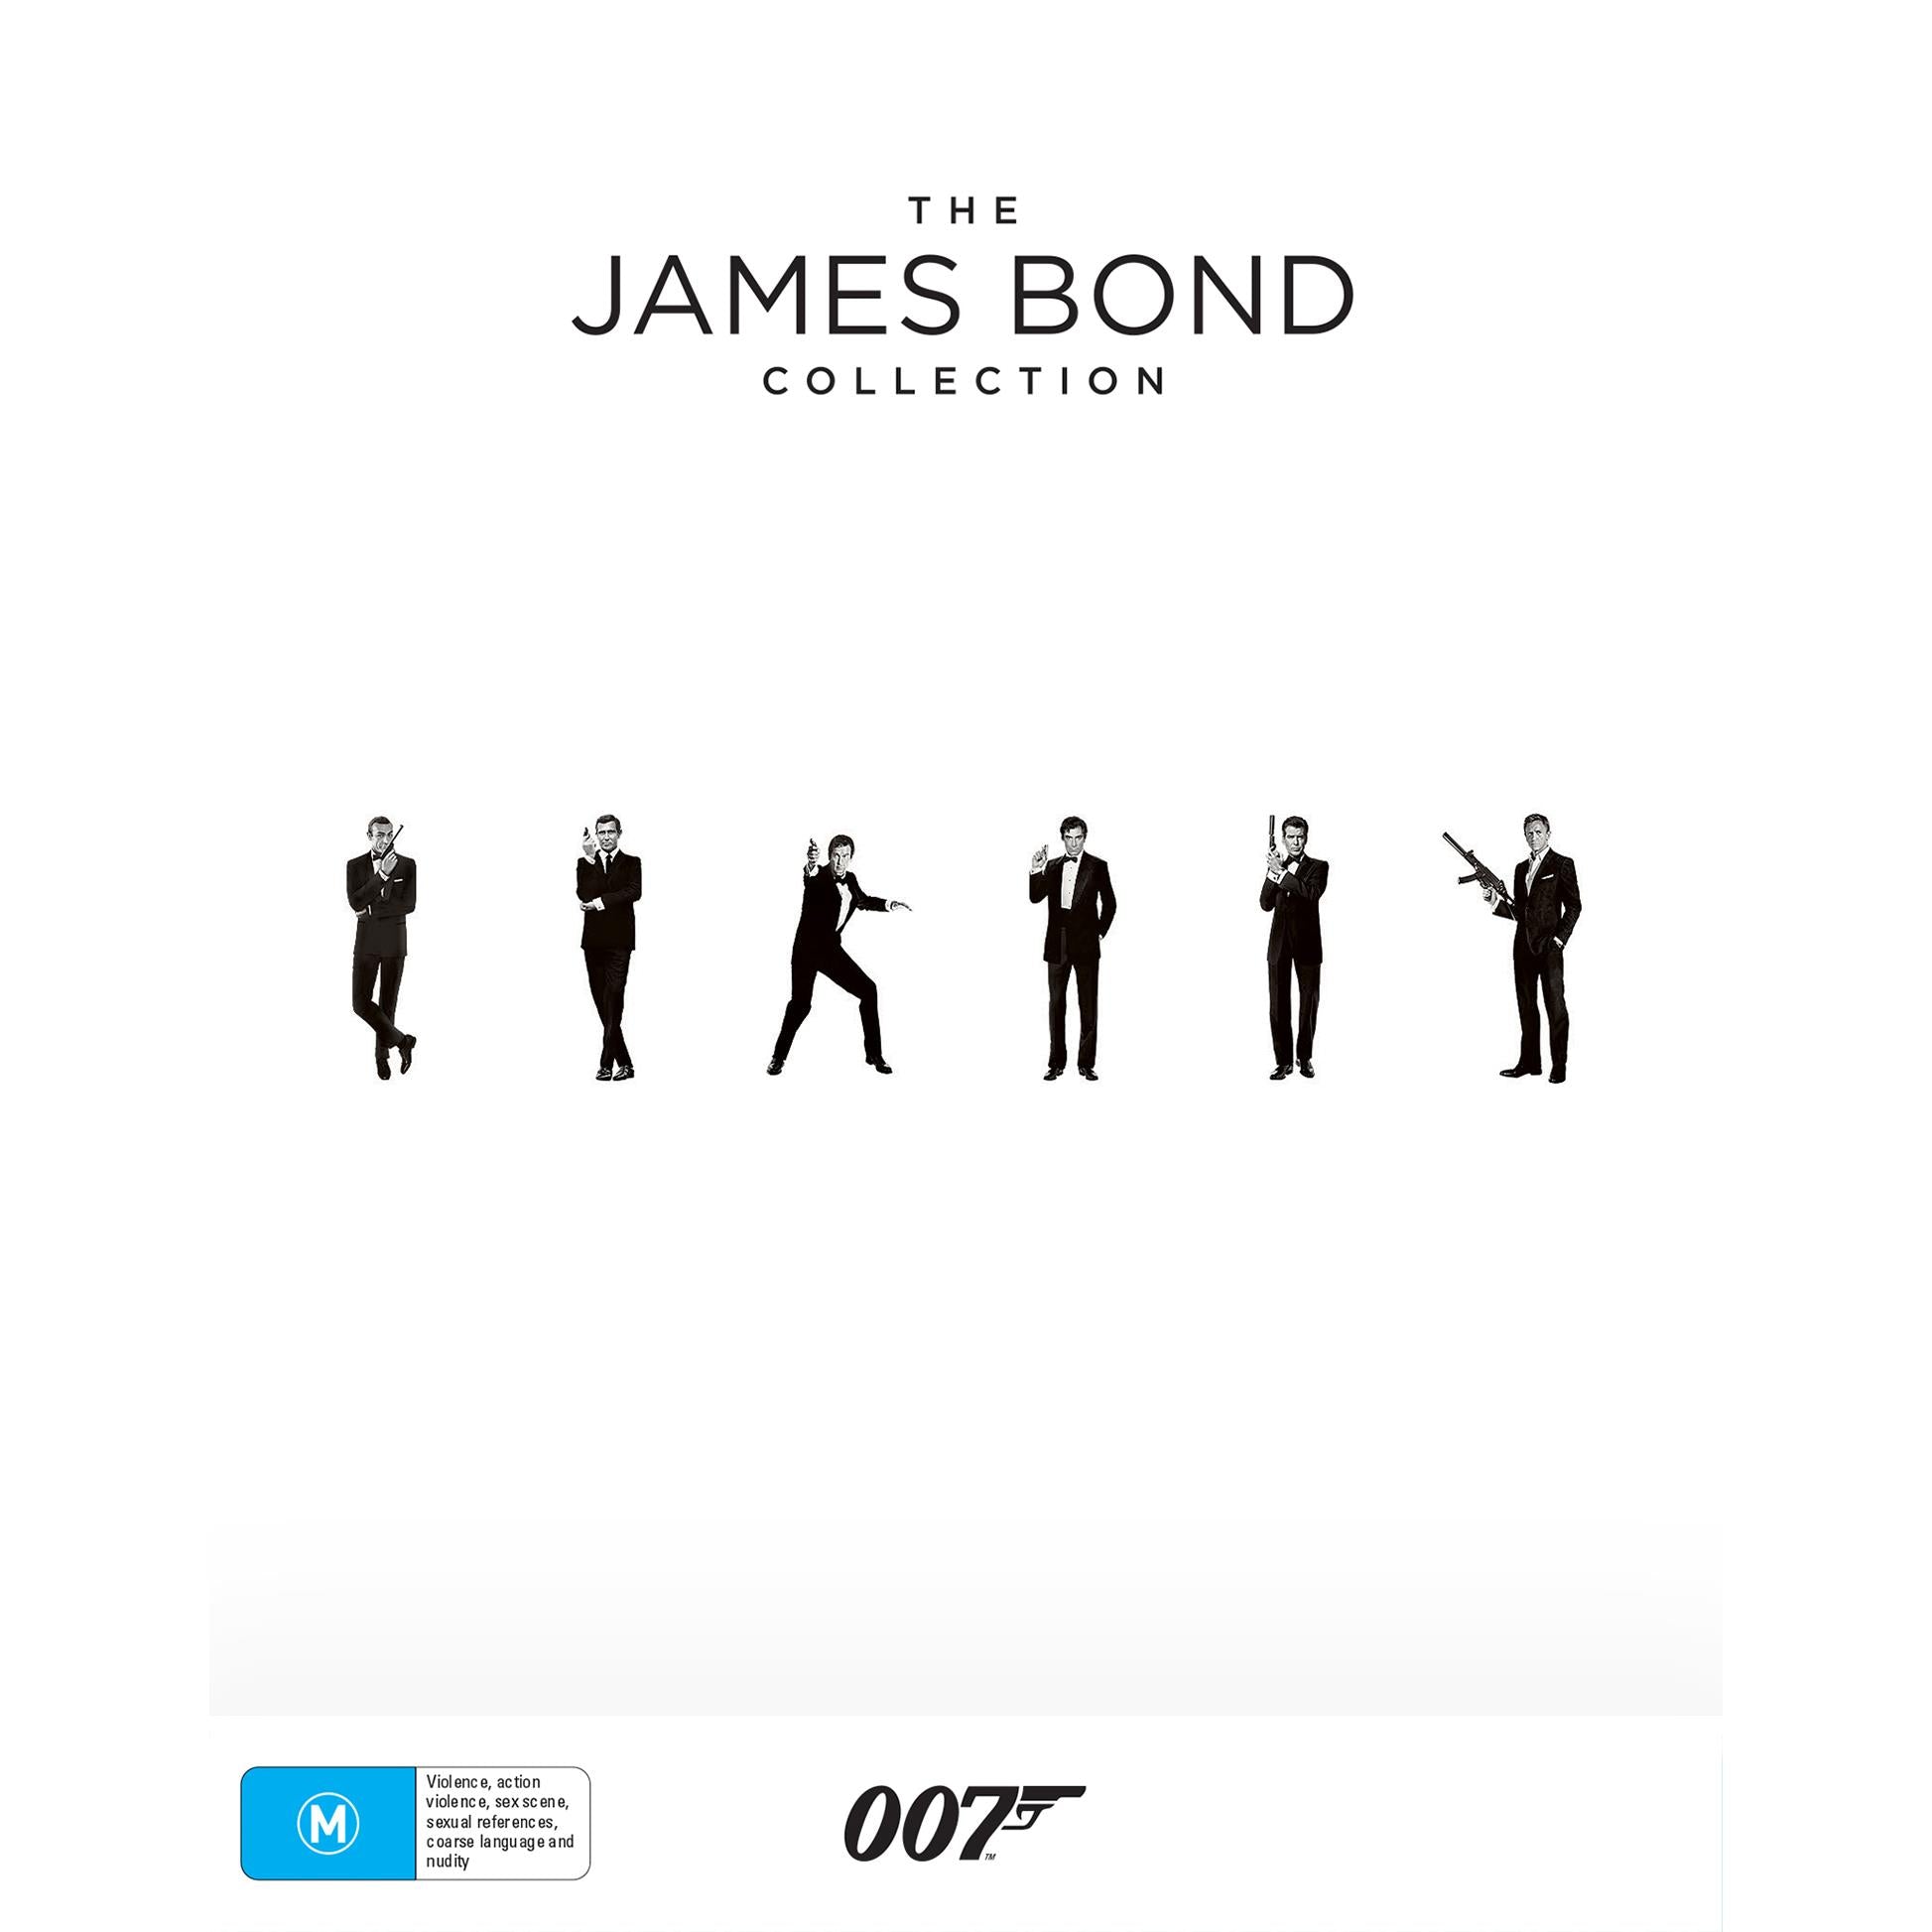 james bond collection, the